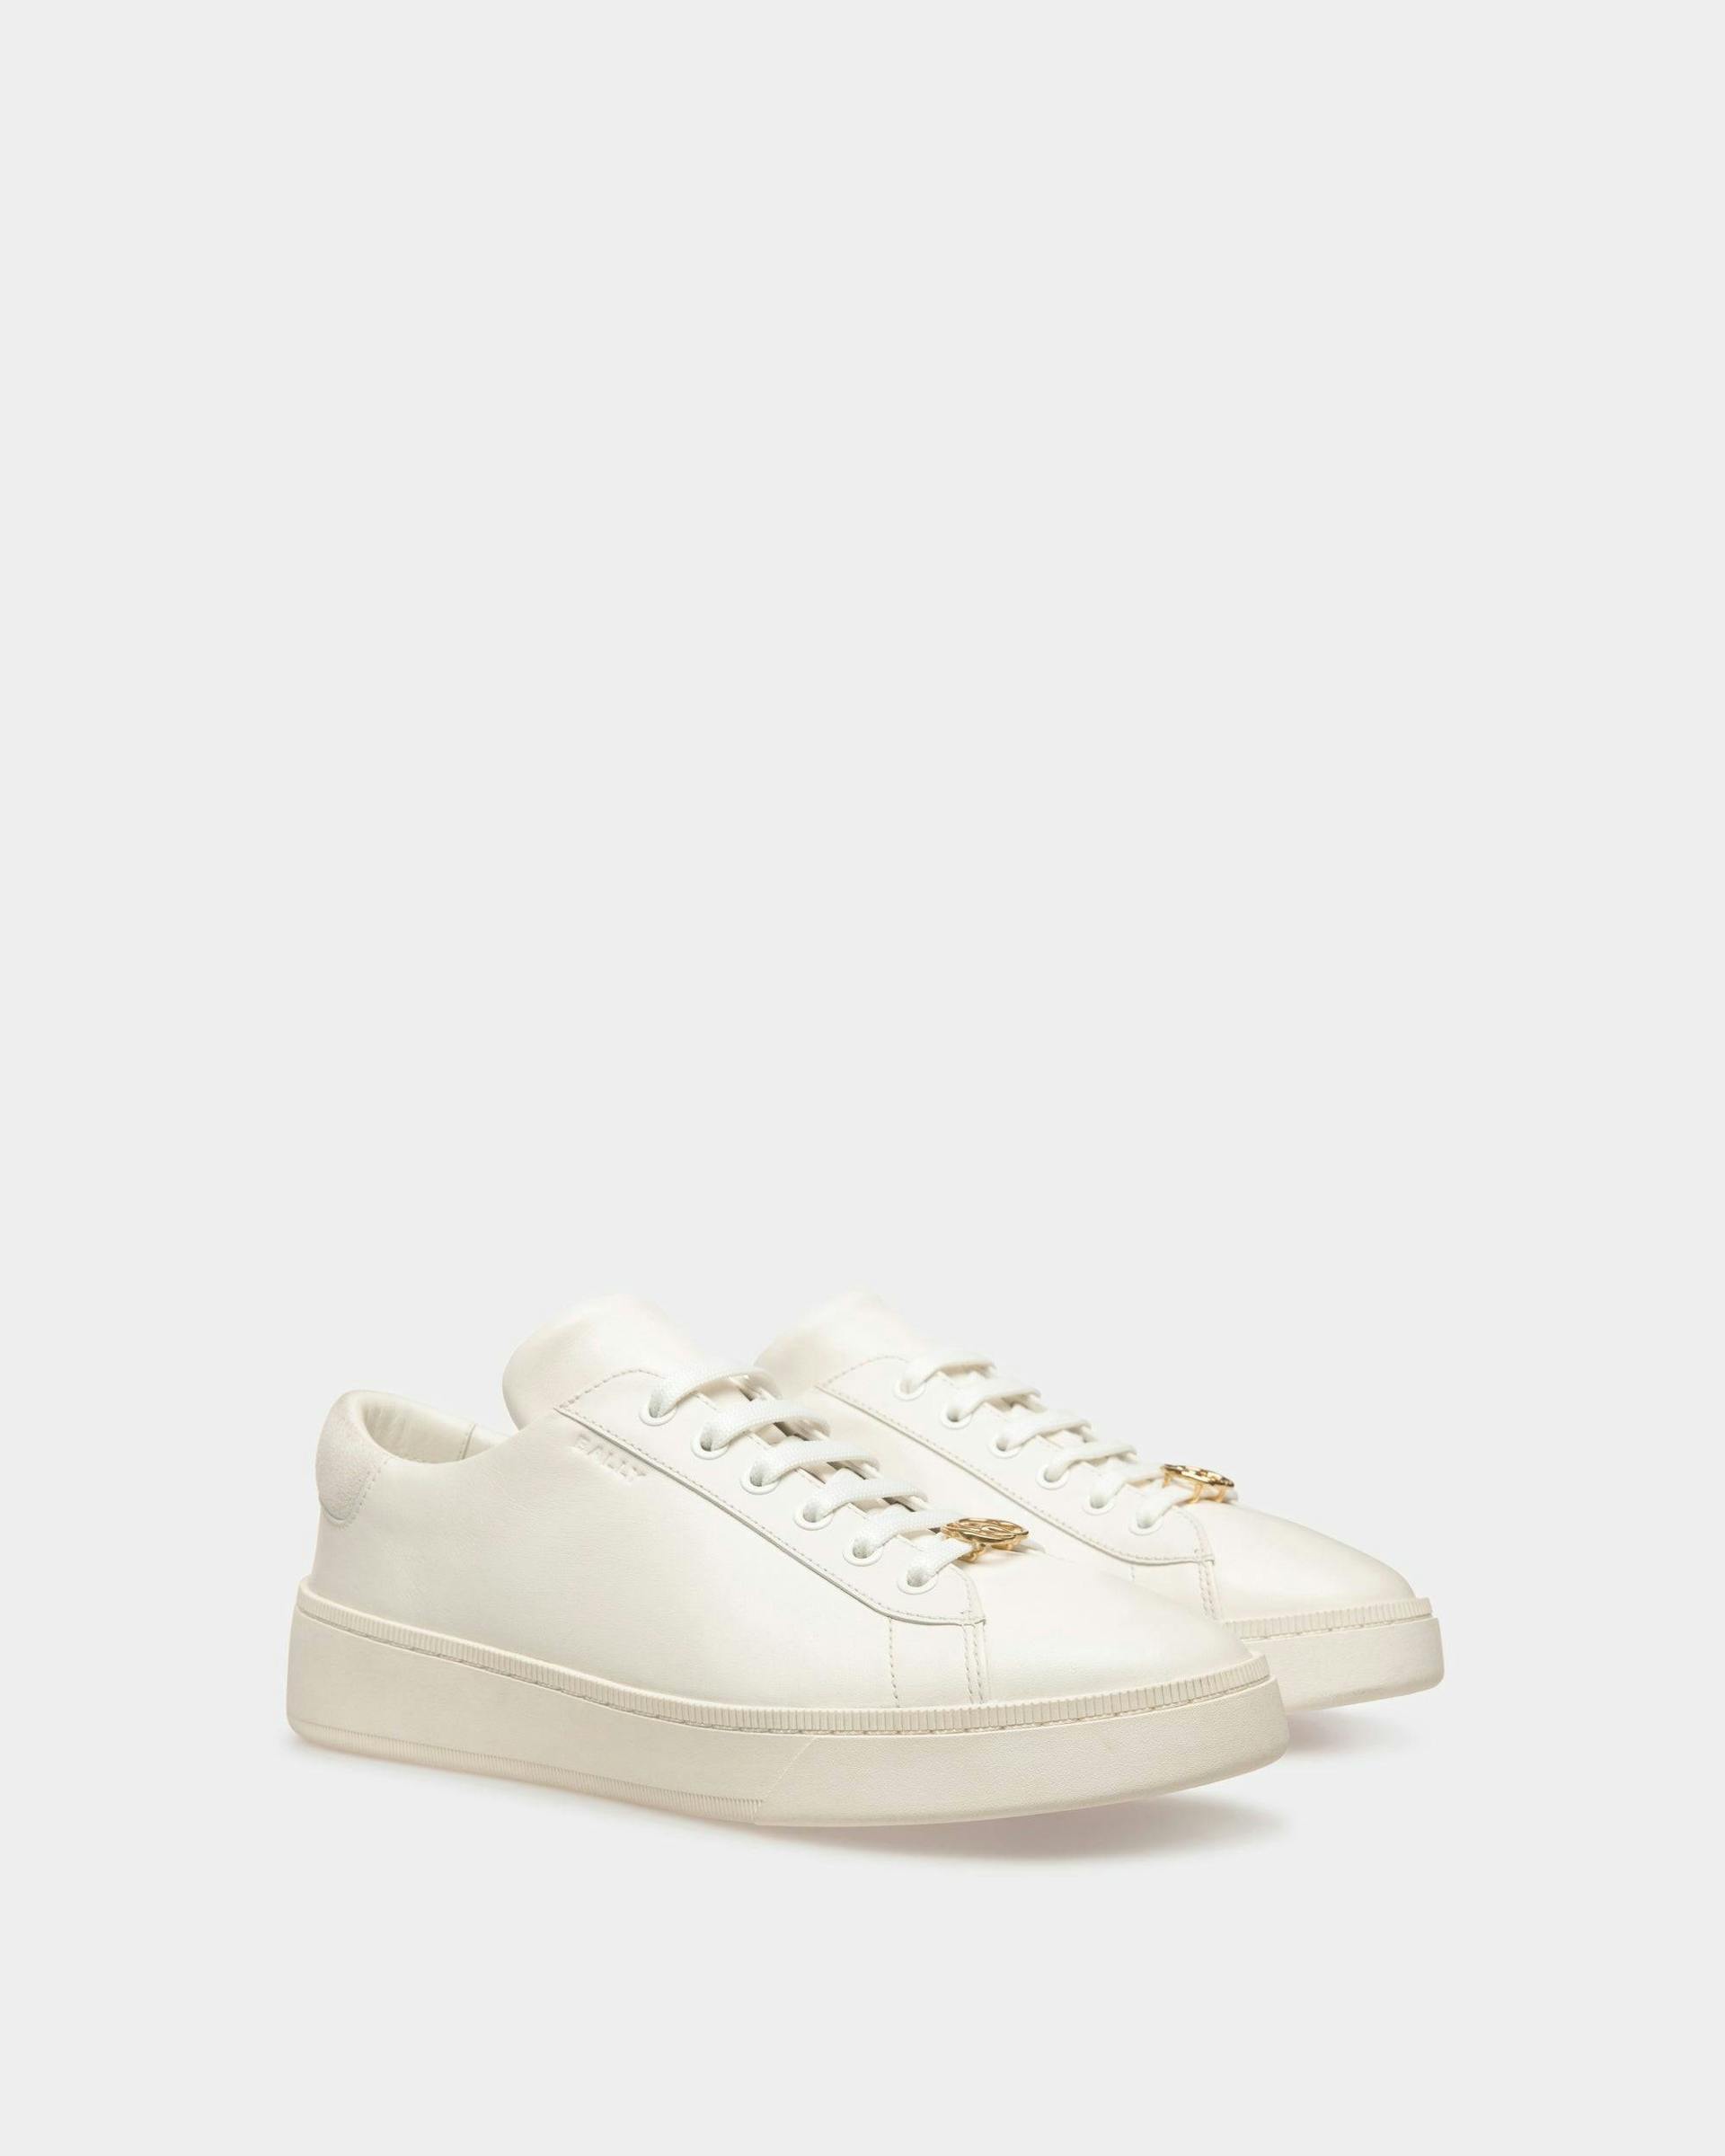 Men's Raise Sneakers In White Leather | Bally | Still Life 3/4 Front